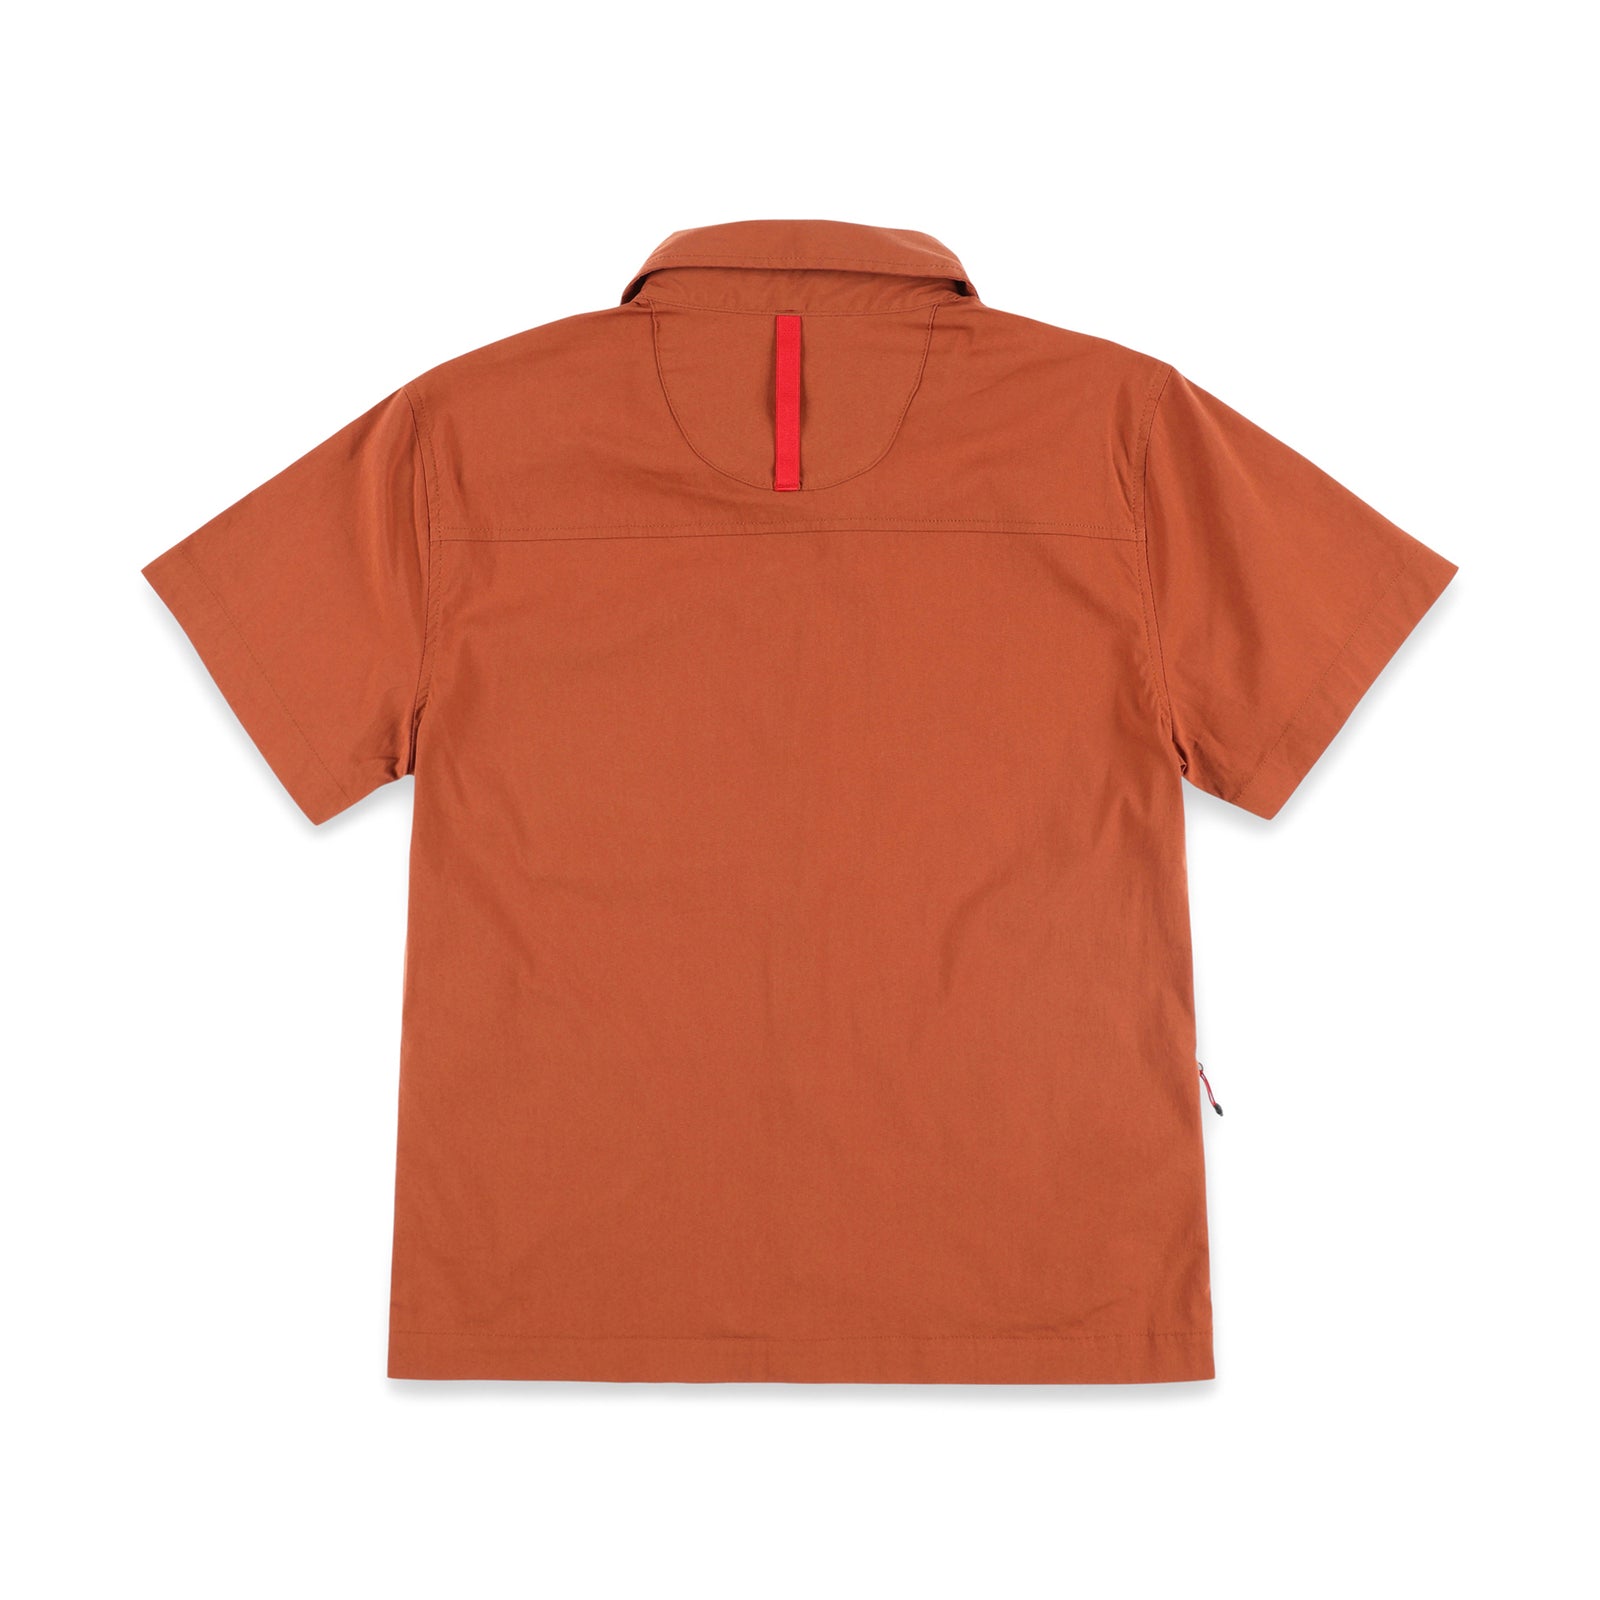 PackFast Packing Band on back of Topo Designs Women's Global Shirt Short Sleeve 30+ UPF rated travel shirt in "Brick" orange.